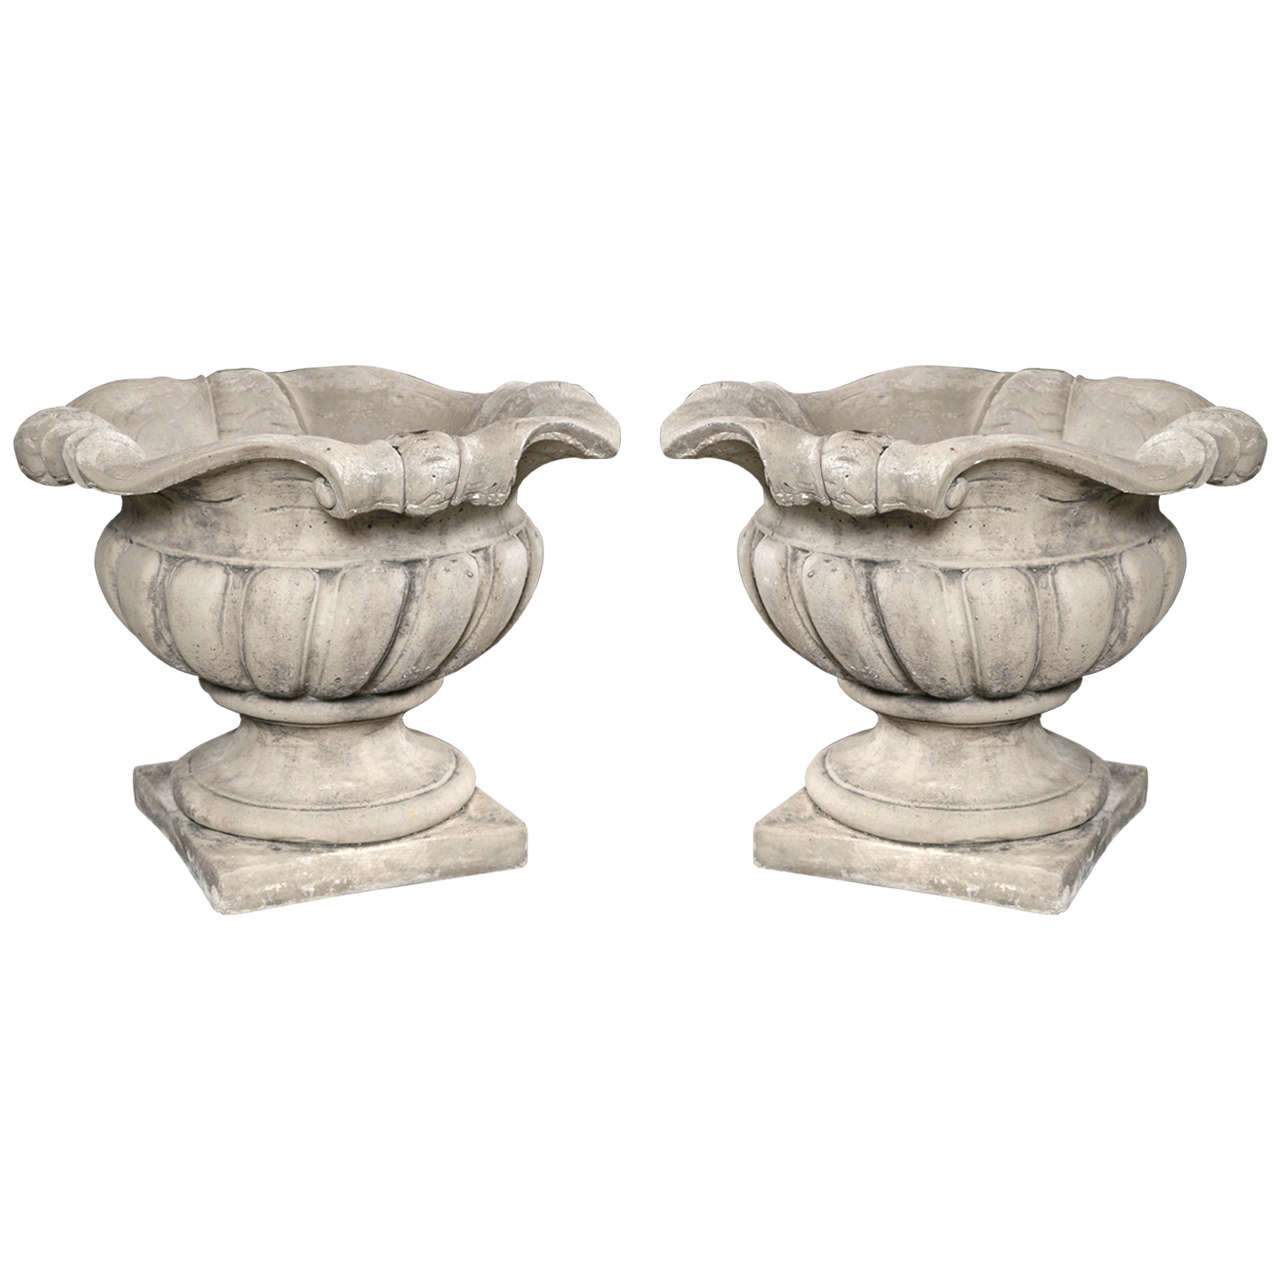 Pair of English Garden Urns For Sale